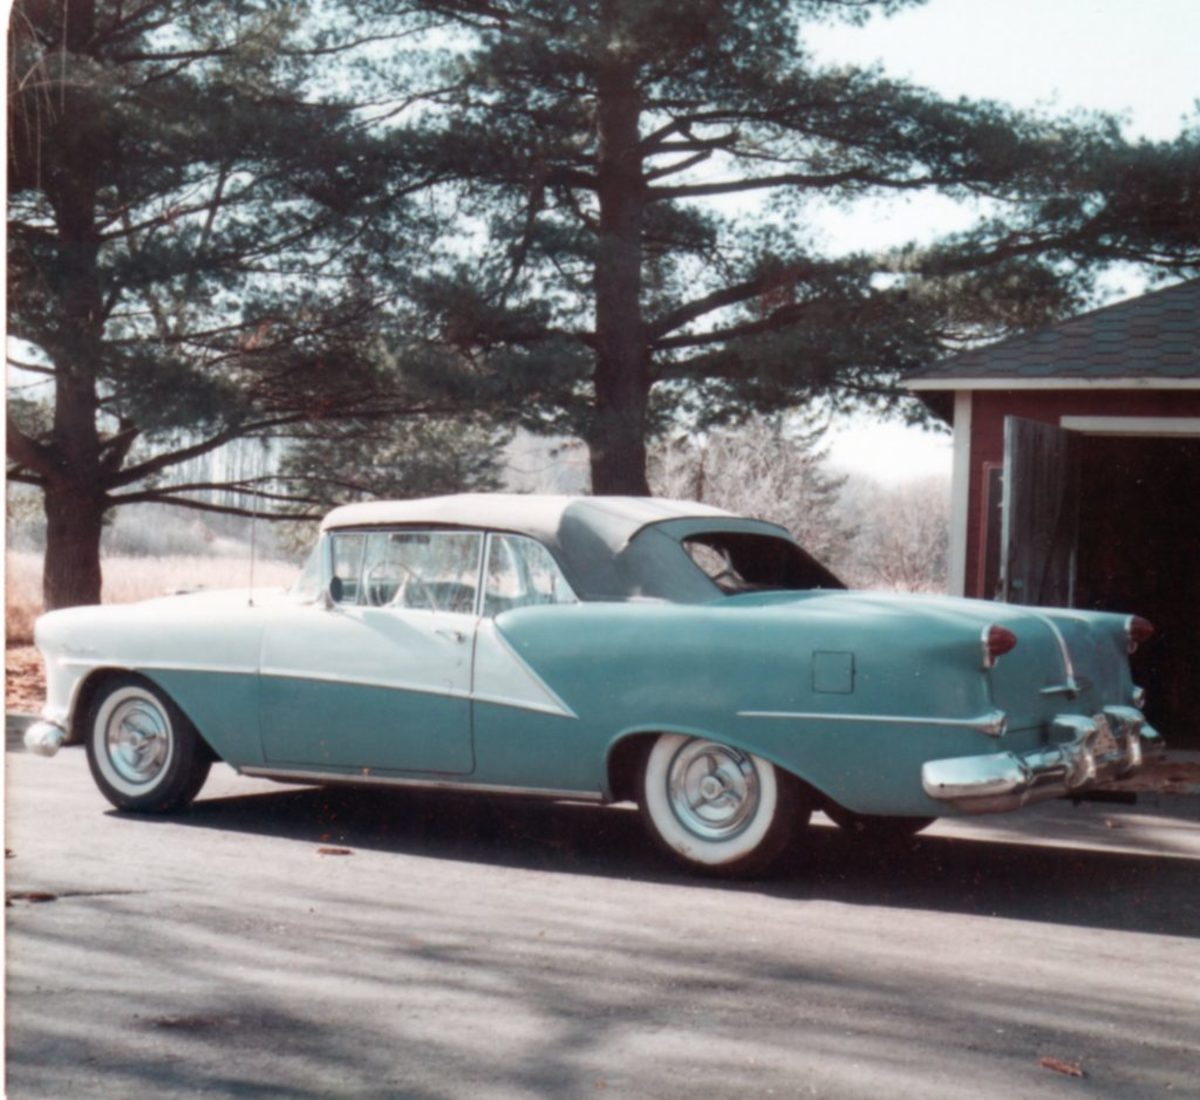 The 1954 Oldsmobile Starfire Ninety-Eight convertible in 1976 after Terry Boyce drove it from Pennsylvania to his home in Wisconsin. It hit 30,000 miles on the drive home. (Terry Boyce photo)